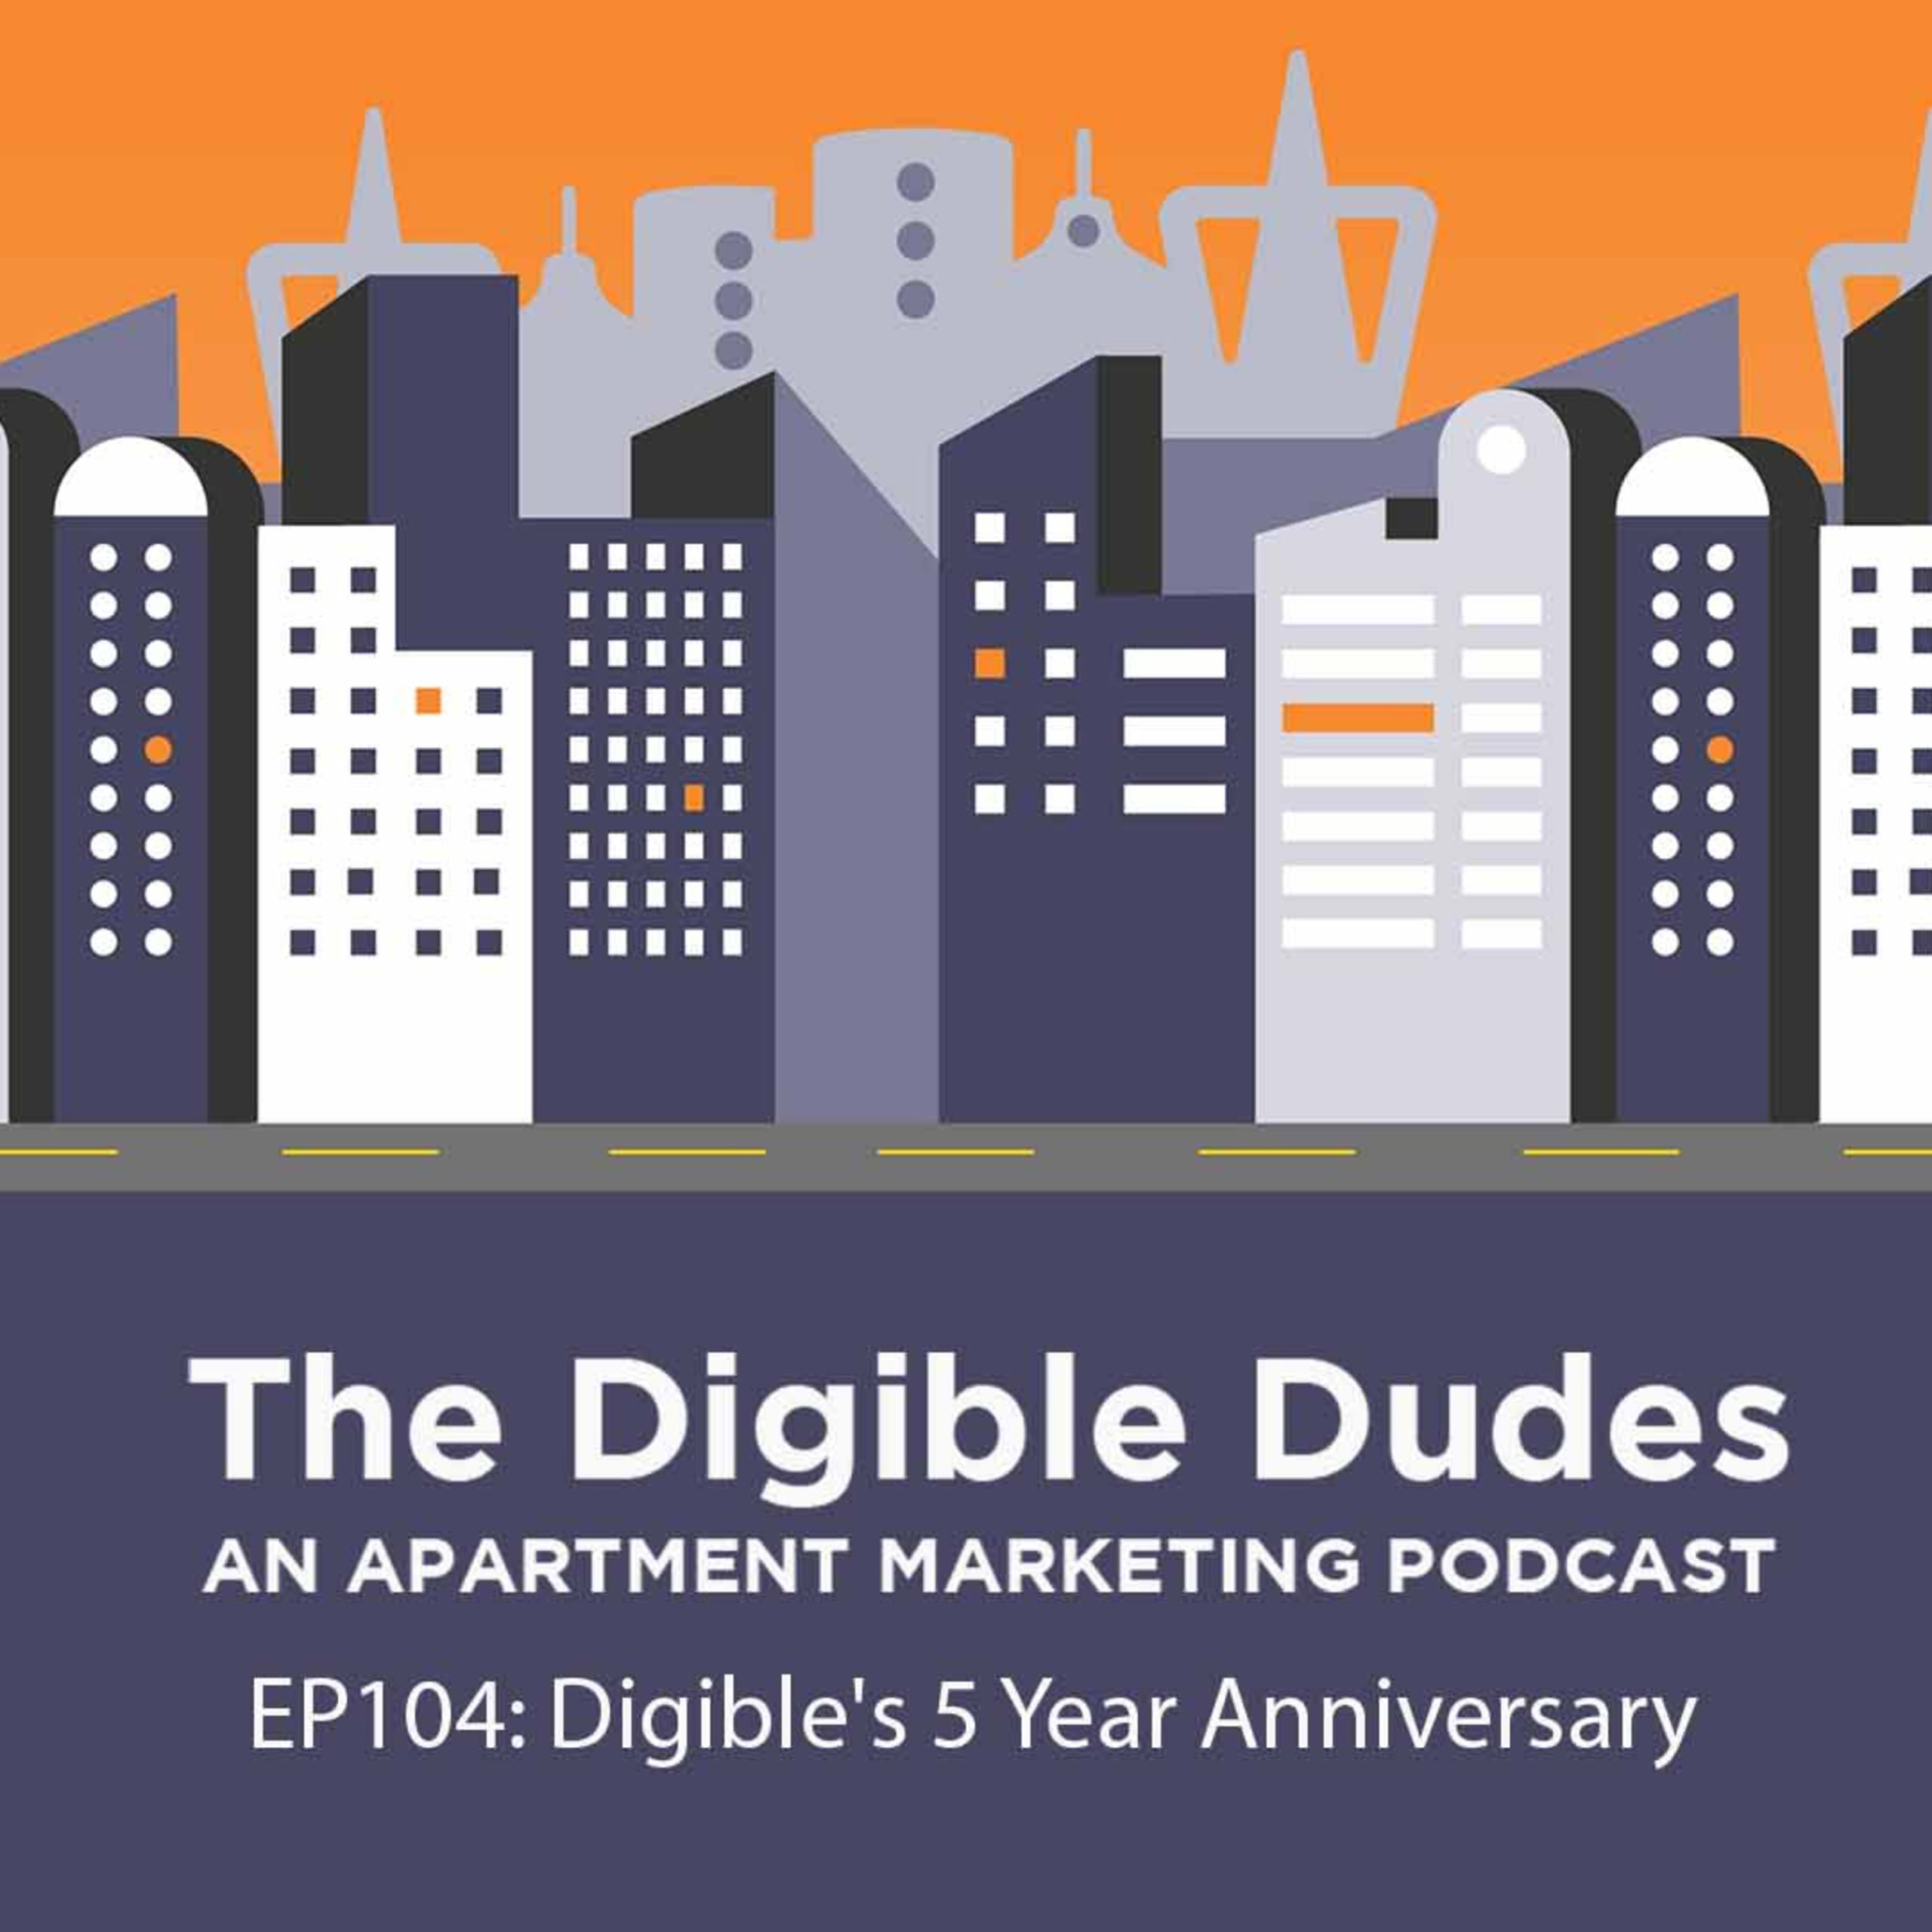 EP104: Digible's 5 Year Anniversary